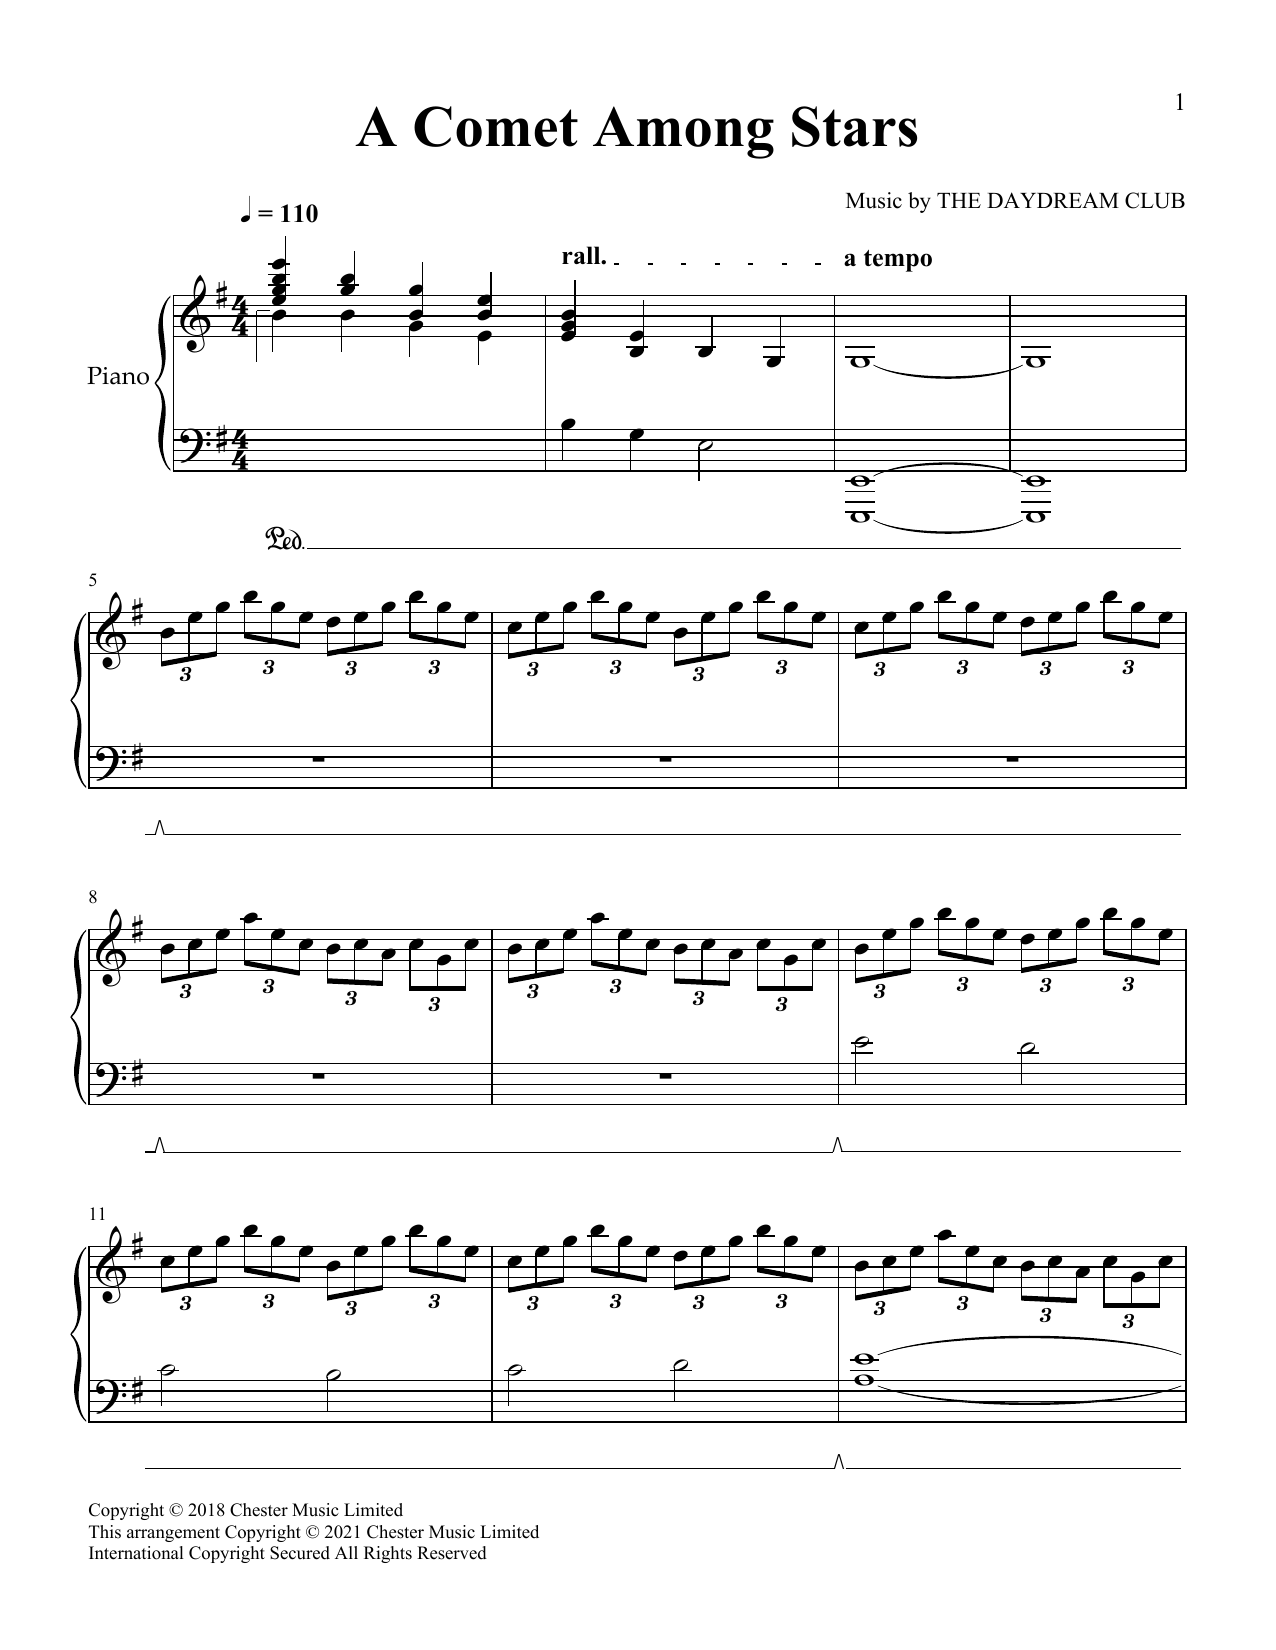 Download The Daydream Club A Comet Among Stars Sheet Music